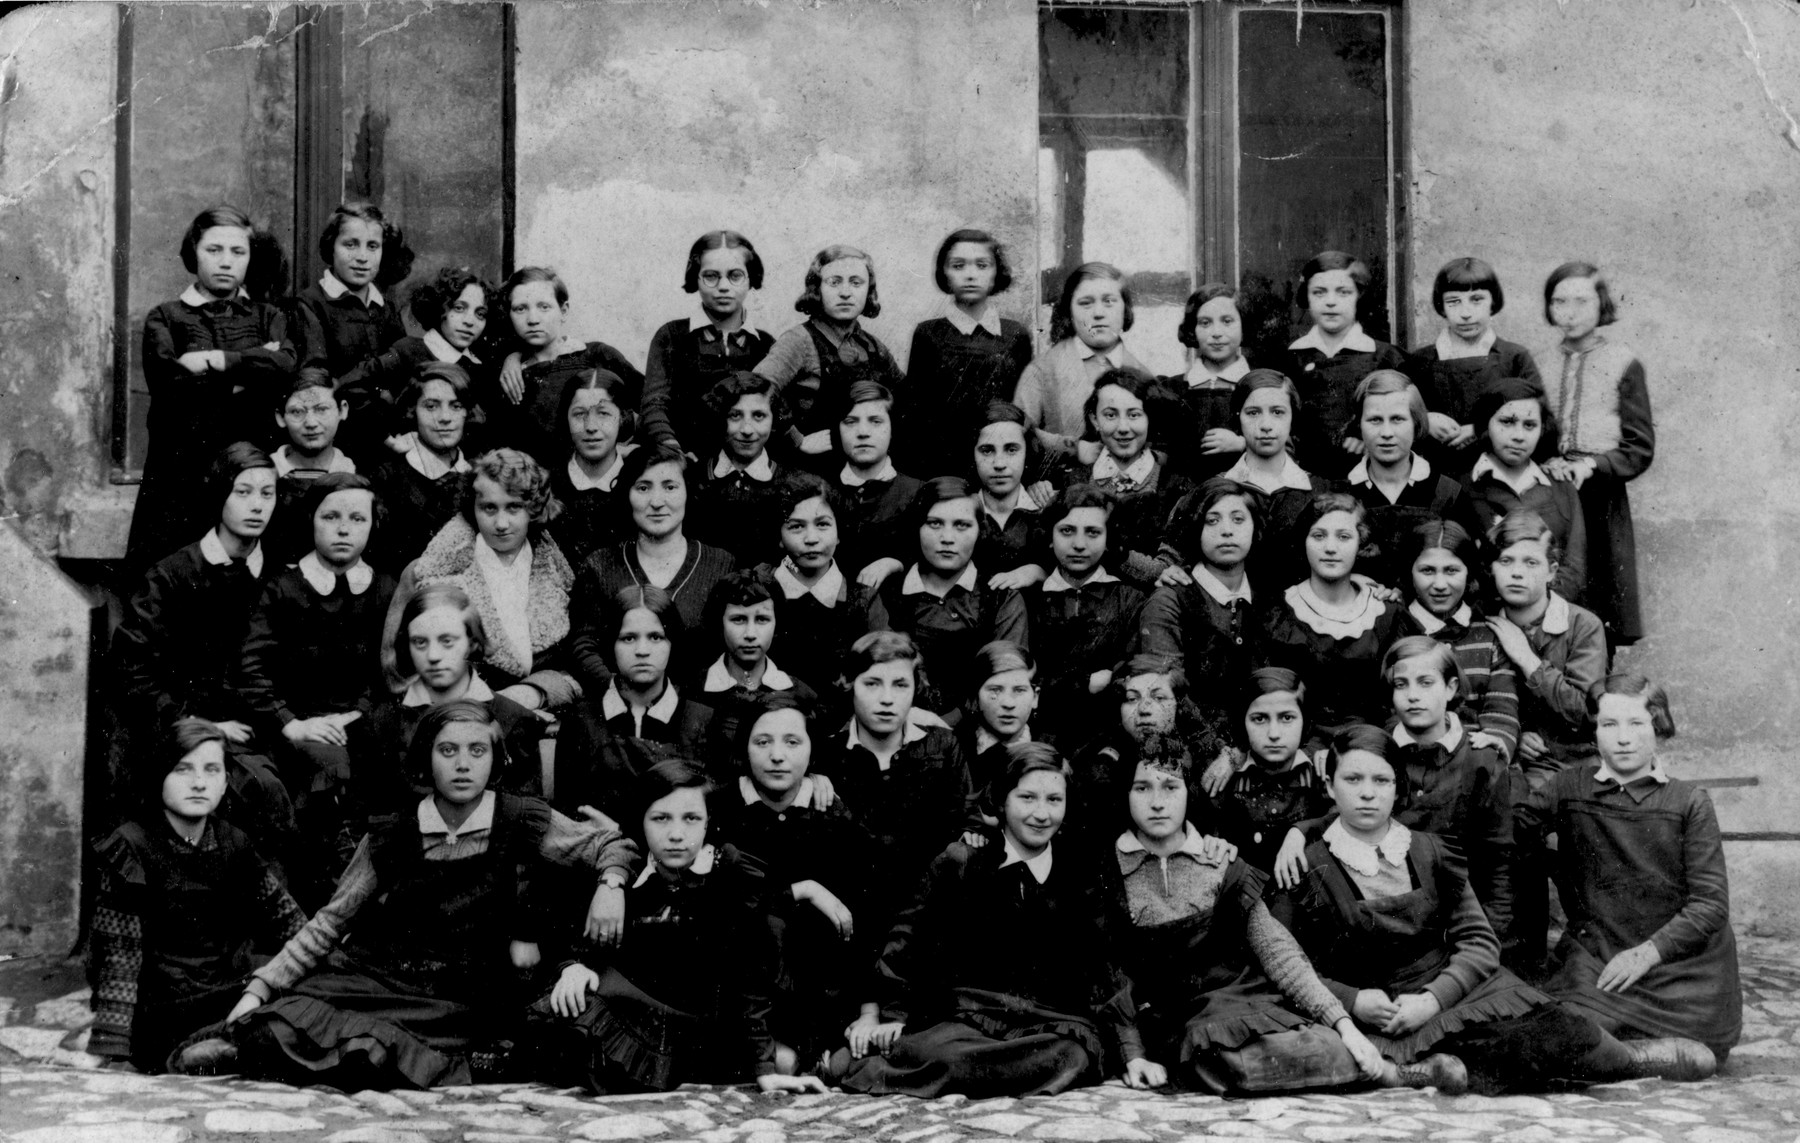 Group portrait of students of the Beit Yaakov religious school for girls in Bedzin.  

Among those pictured is Laja Szyjewicz.